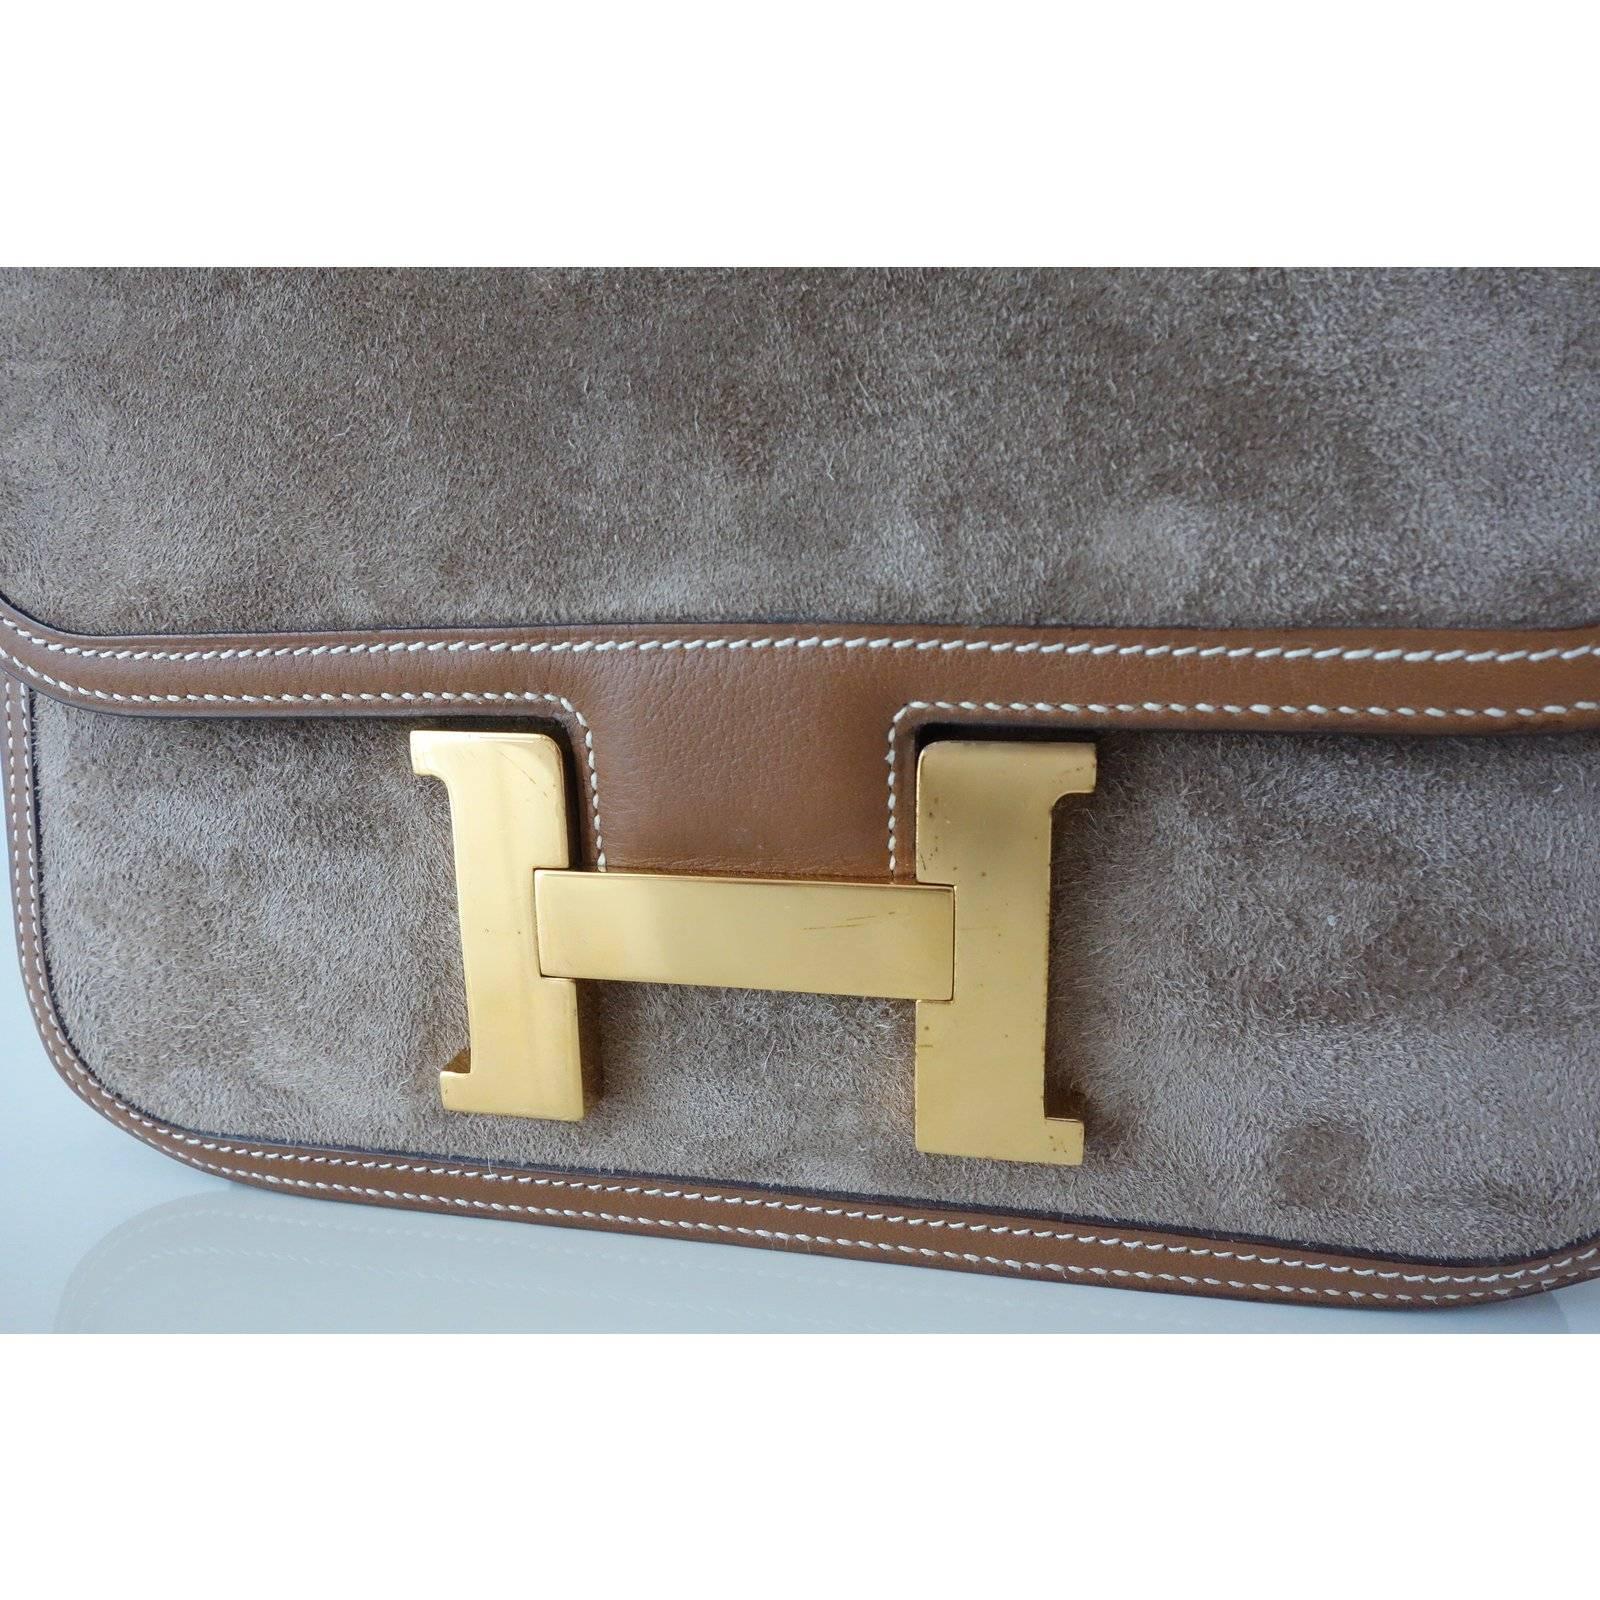 Women's Hermes Vintage Constance Hand Bag Suede and Gold Leather GHW 23 cm